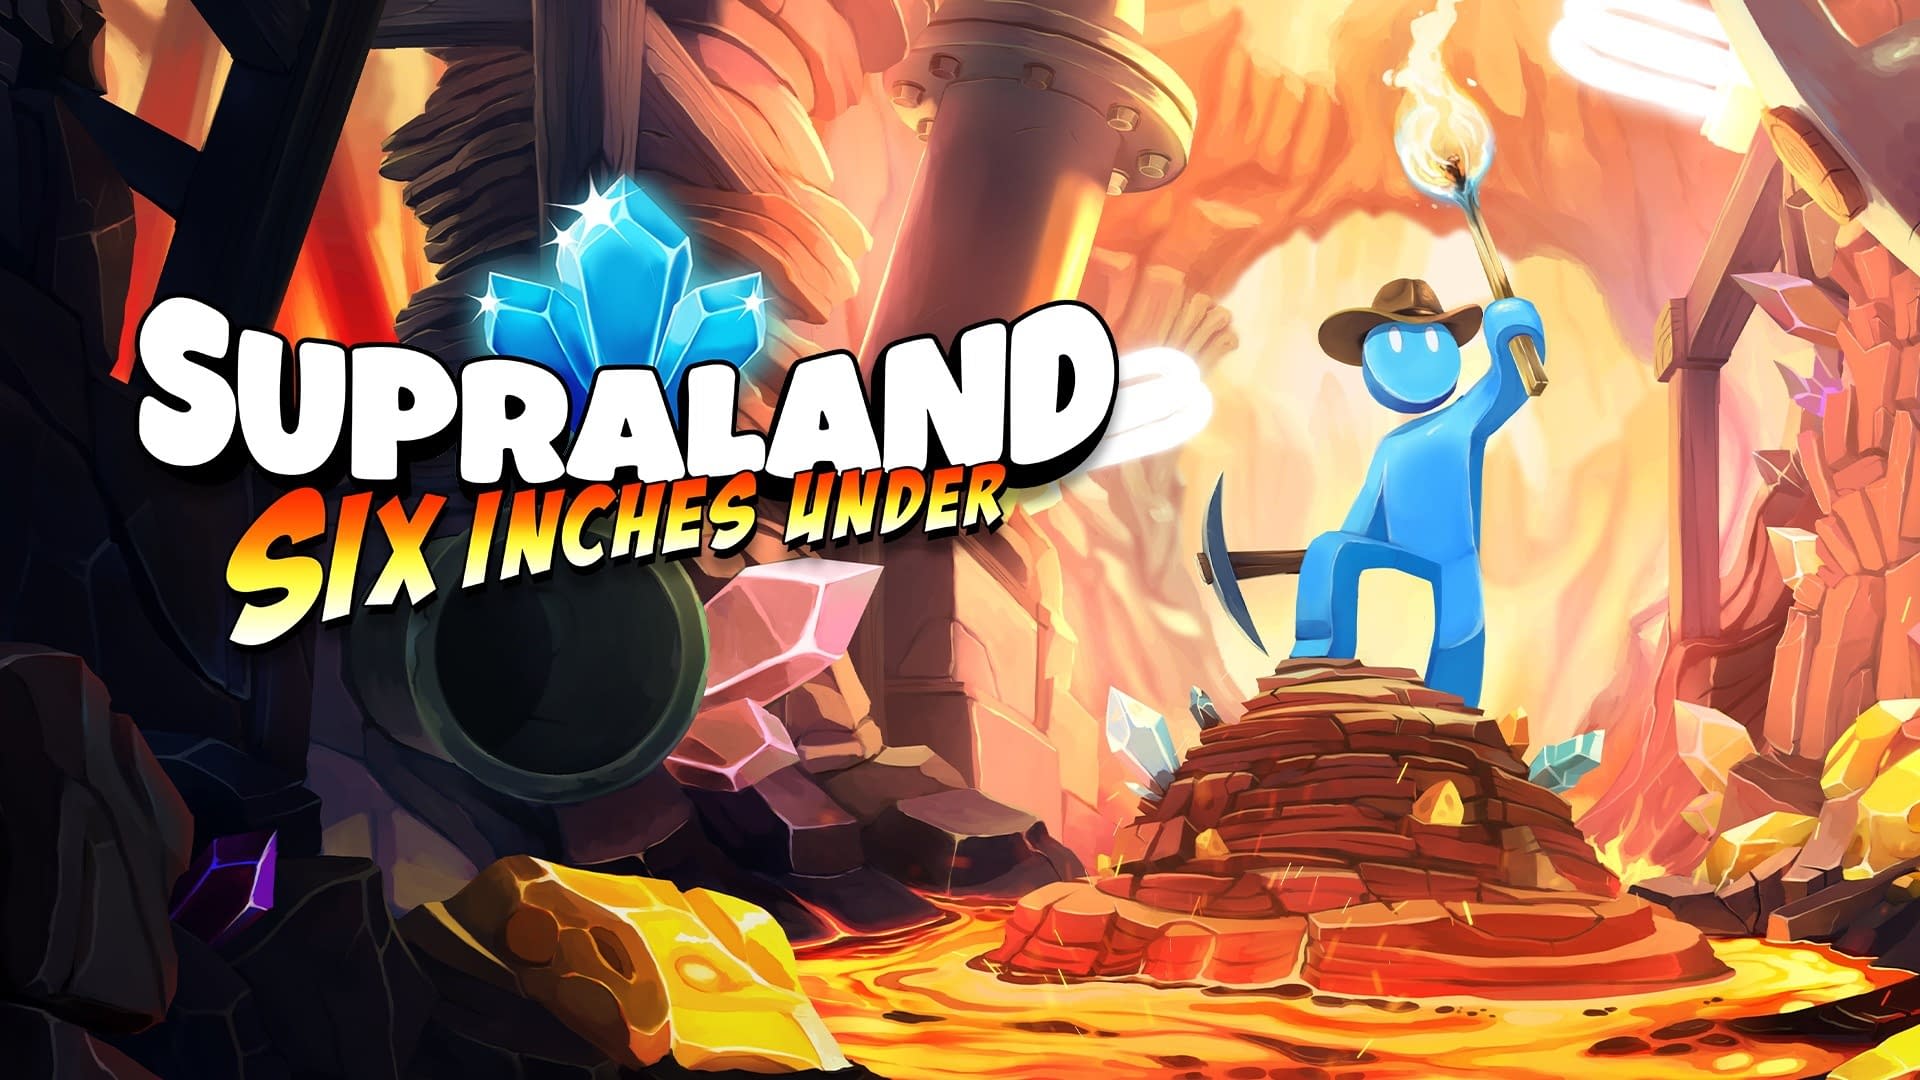 Supraland Six Inches Under now available for Playstation and Xbox consoles